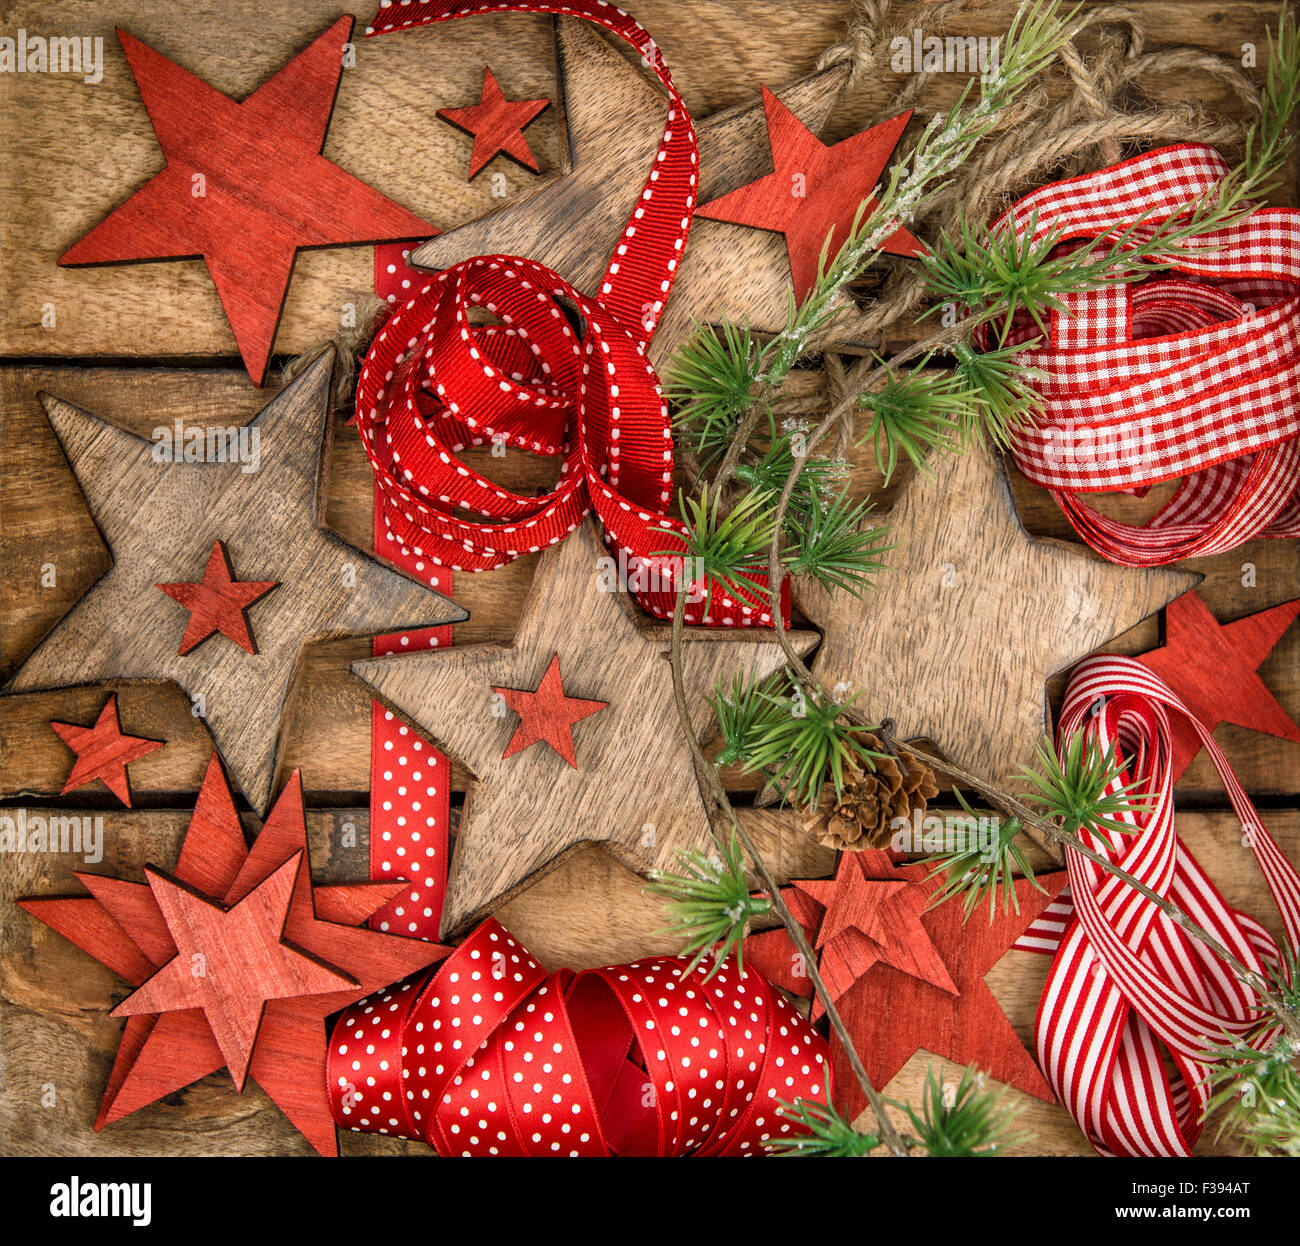 Christmas decorations wooden stars and red ribbons. Nostalgic retro style picture Stock Photo